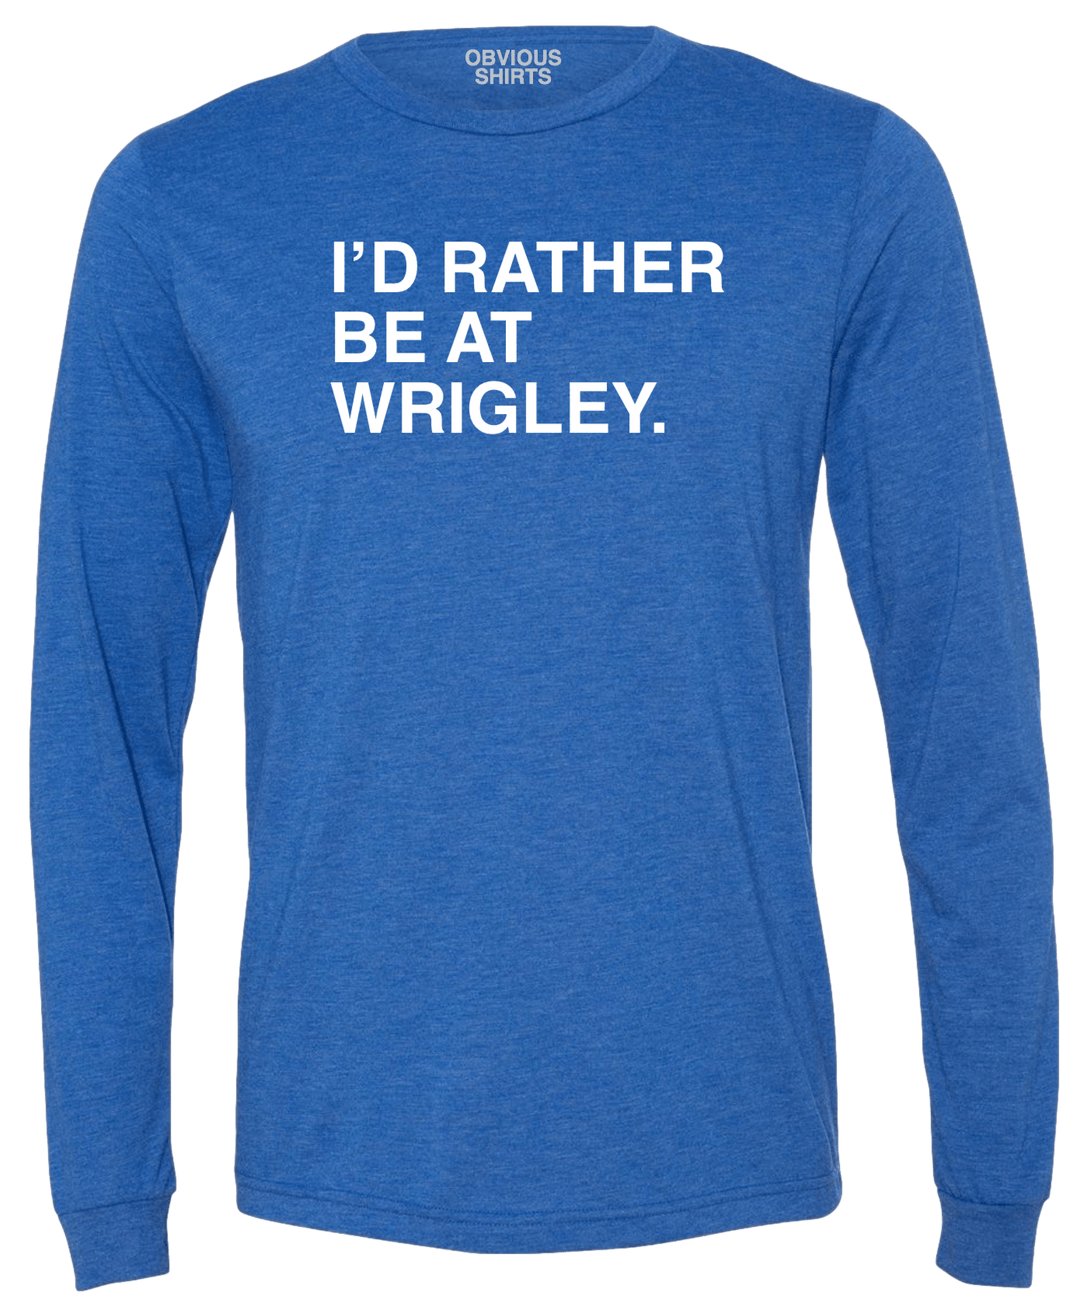 I'D RATHER BE AT WRIGLEY. (LONG SLEEVE) - OBVIOUS SHIRTS.